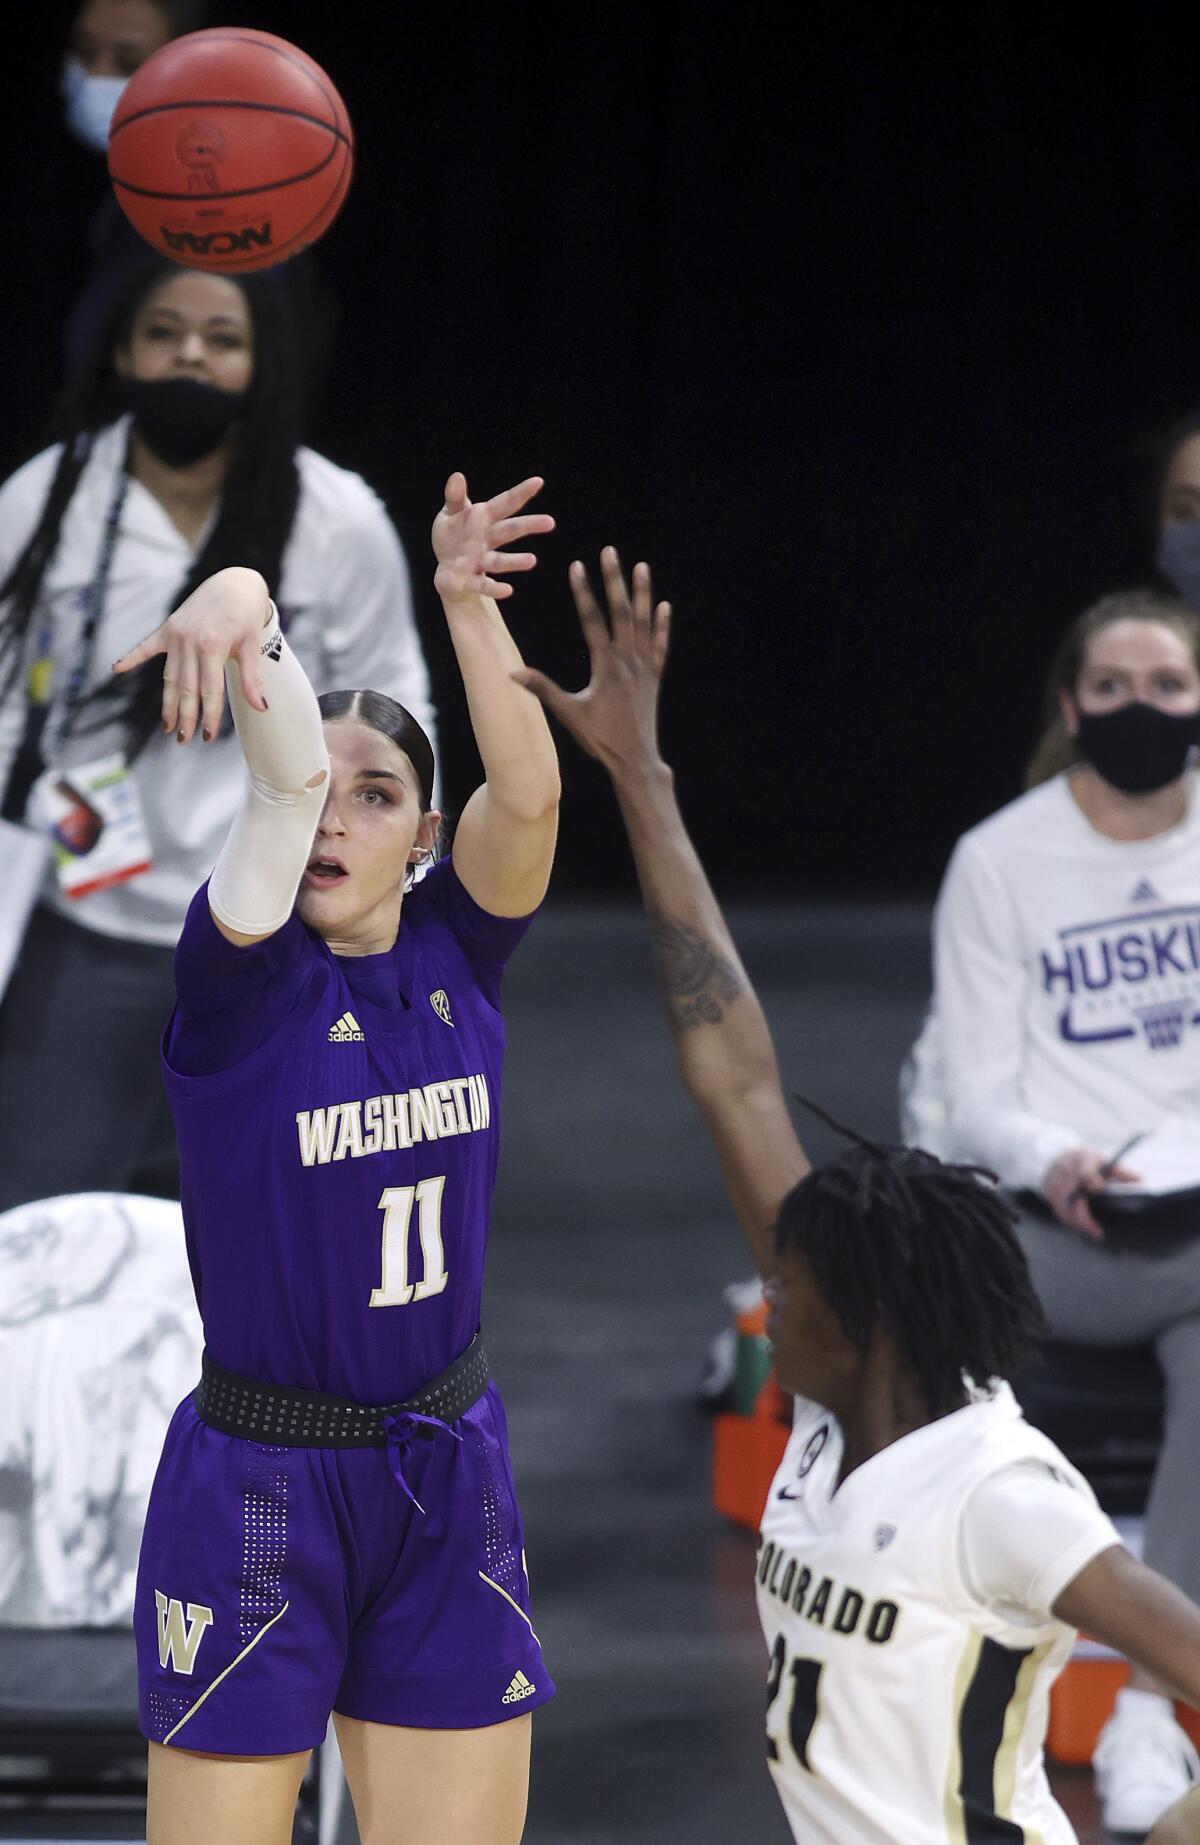 Washington forward Haley Van Dyke (11) shoots as Colorado guard Mya Hollingshed (21) defends during an NCAA college basketball game in the first round of the Pac-12 women's tournament Wednesday, March 3, 2021, in Las Vegas. (AP Photo/Isaac Brekken)